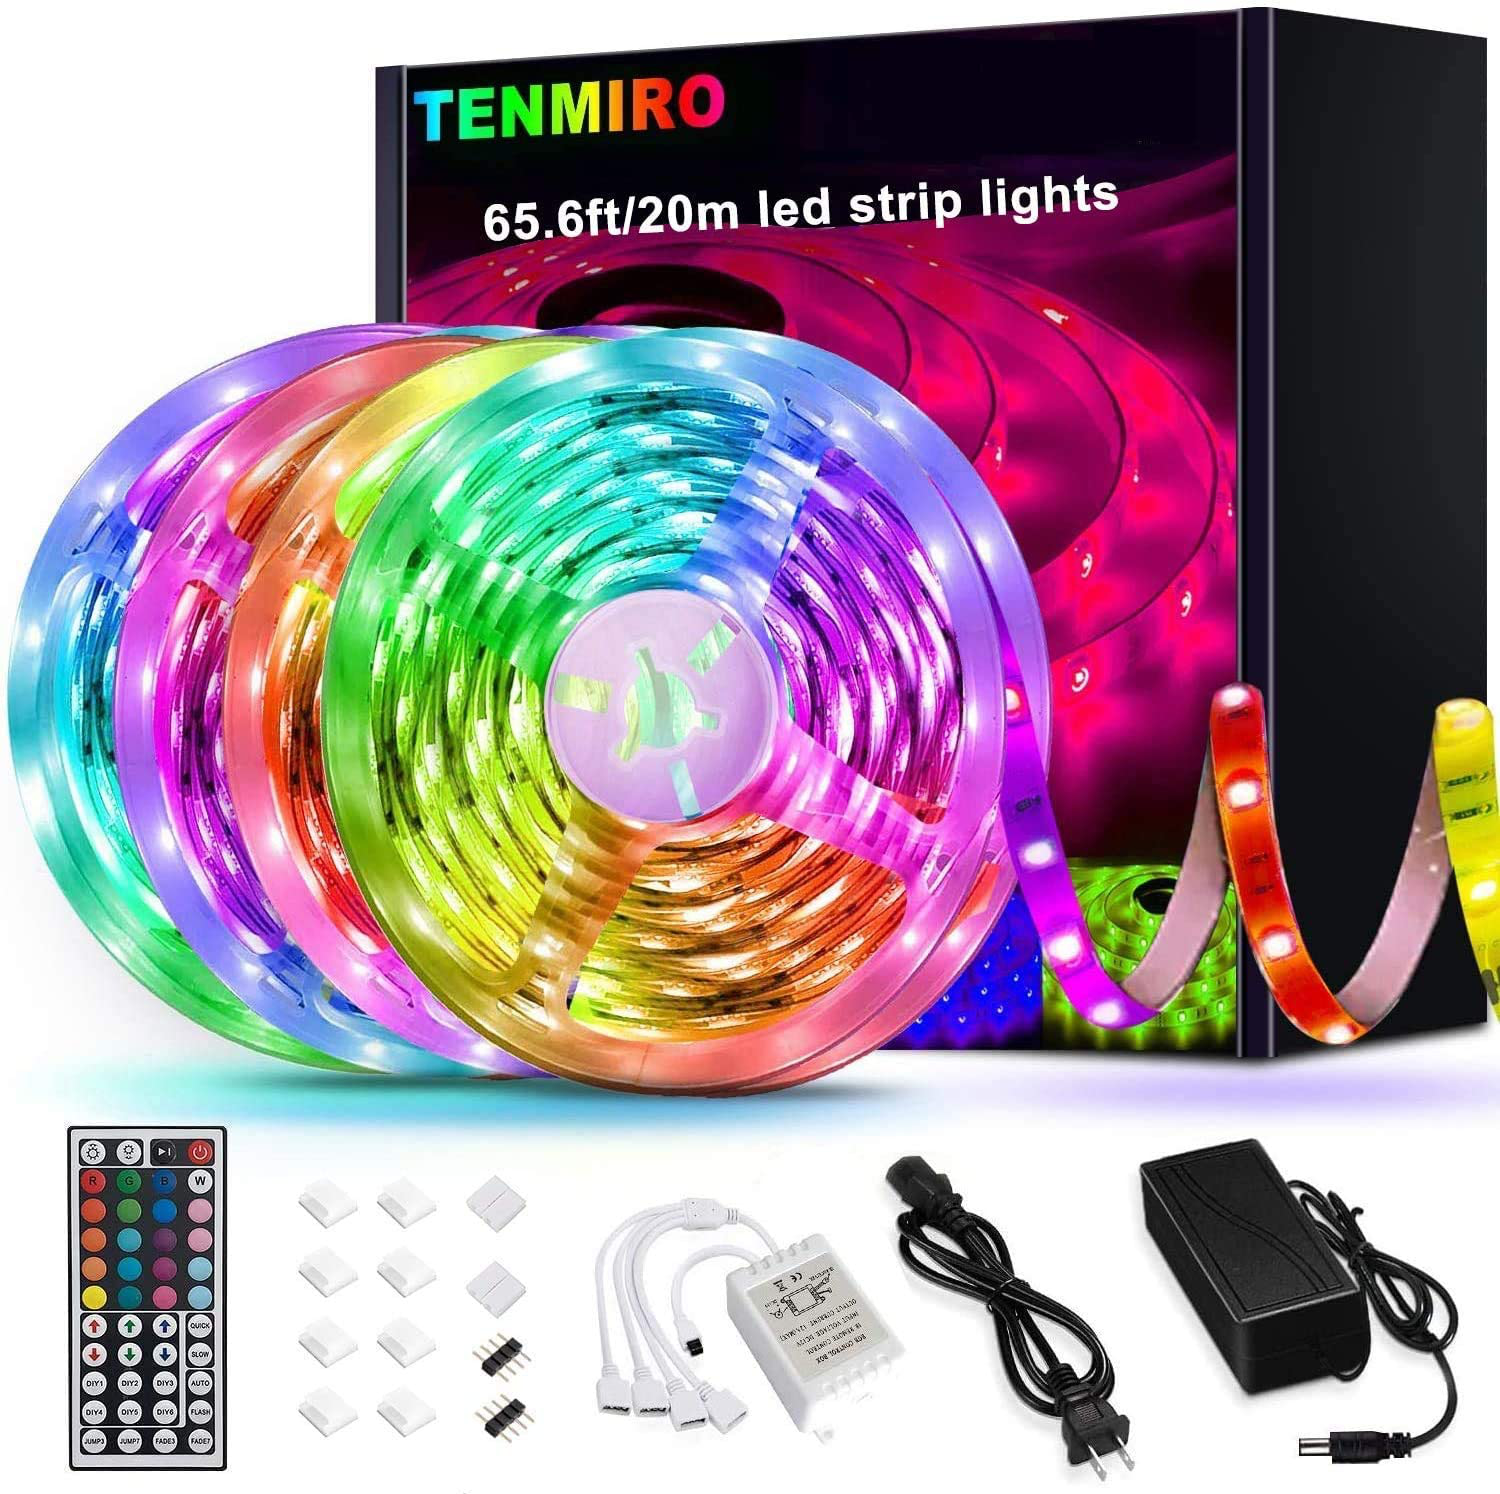 5050RGB LED STRIP LIGHTS COLOUR CHANGING TAPE UNDER CABINET KITCHEN LIGHTING New 